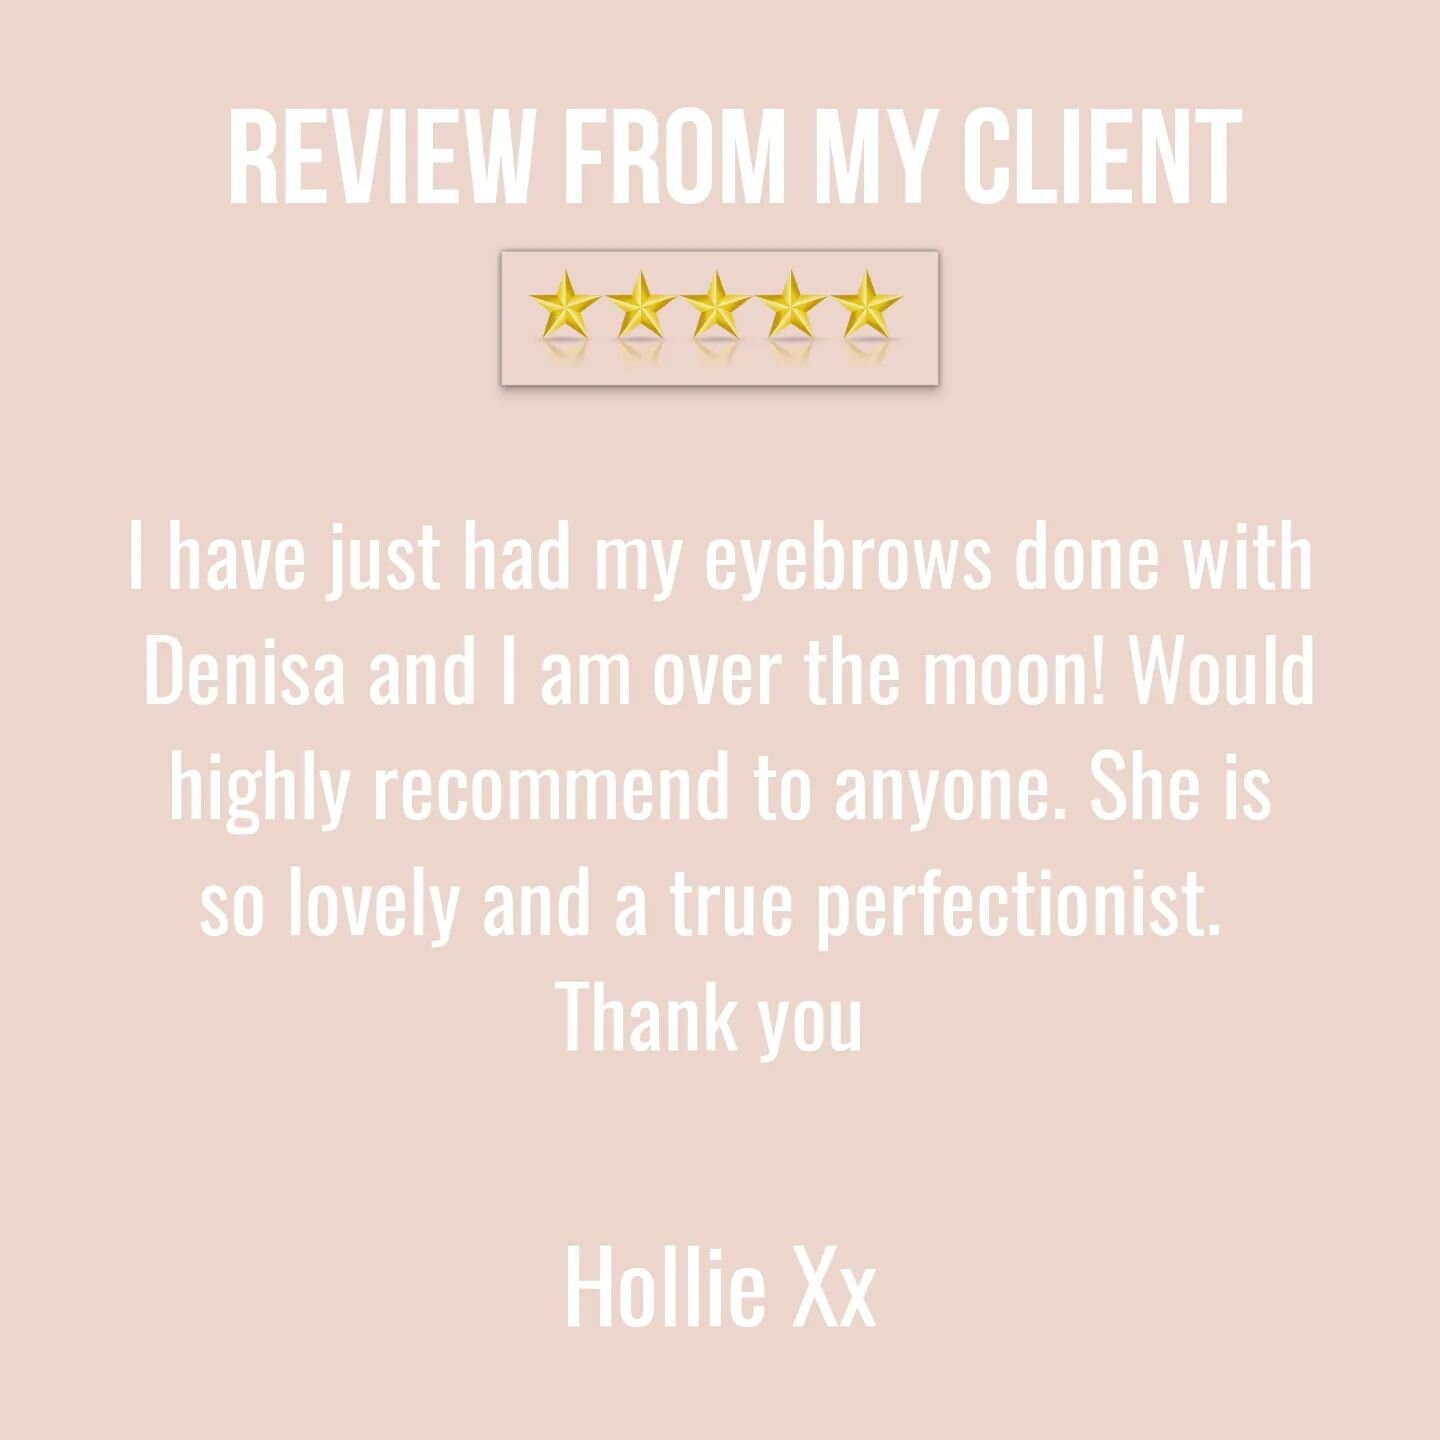 Love from my happy client 🥰&hearts;️

#testimonial #review #beauty #beautybrighton #brightonbeauty #brightonbrows #brightonlashes #brightonlife #brightongirl #brighton #brightonandhove #client